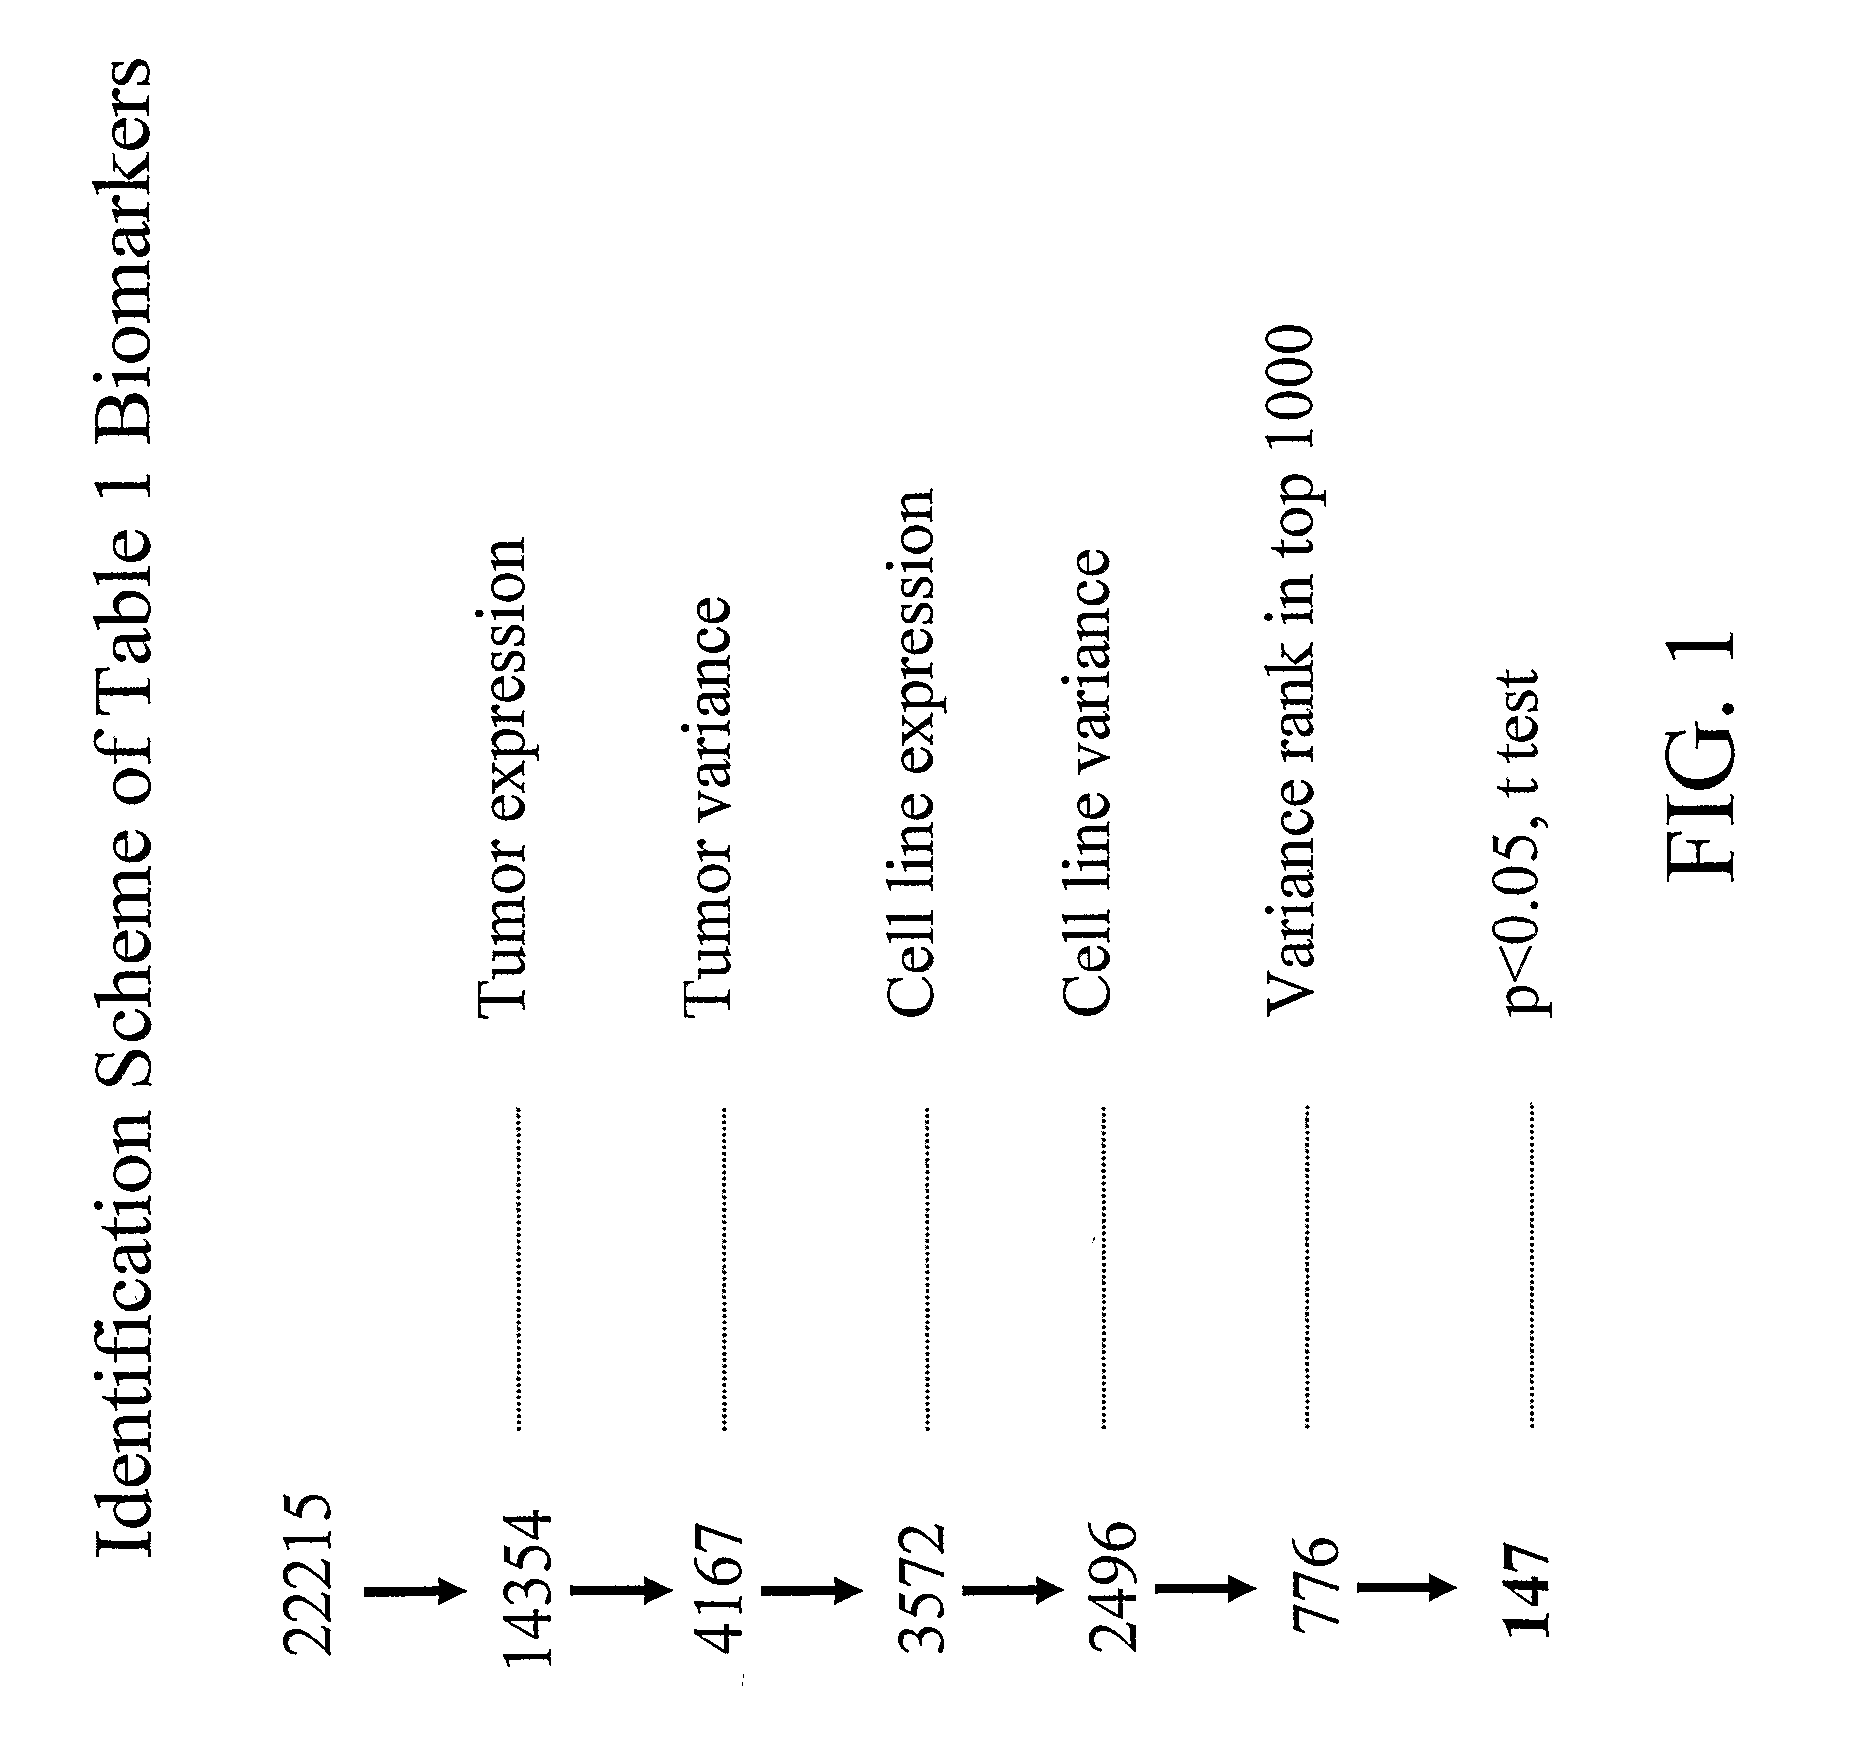 Biomarkers and Methods for Determining Sensitivity to Epidermal Growth Factor Receptor Modulators in Non-Small Cell Lung Cancer